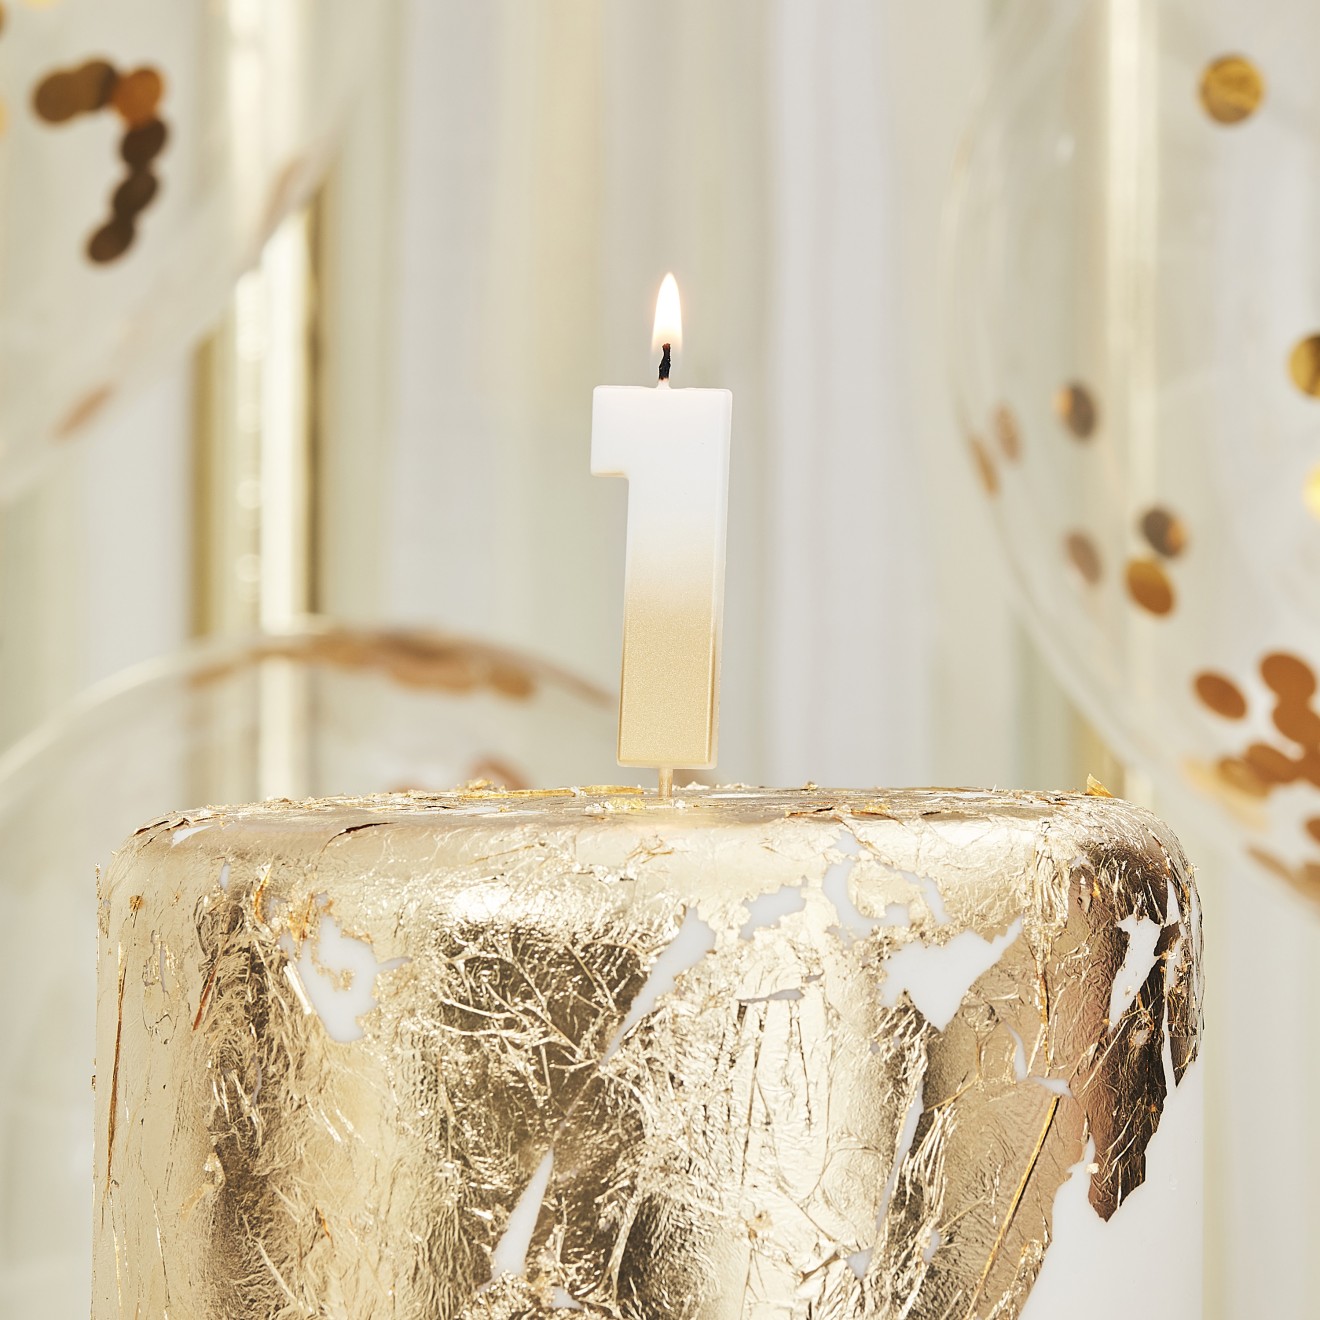 1 Gold Ombre Number Candle - 1